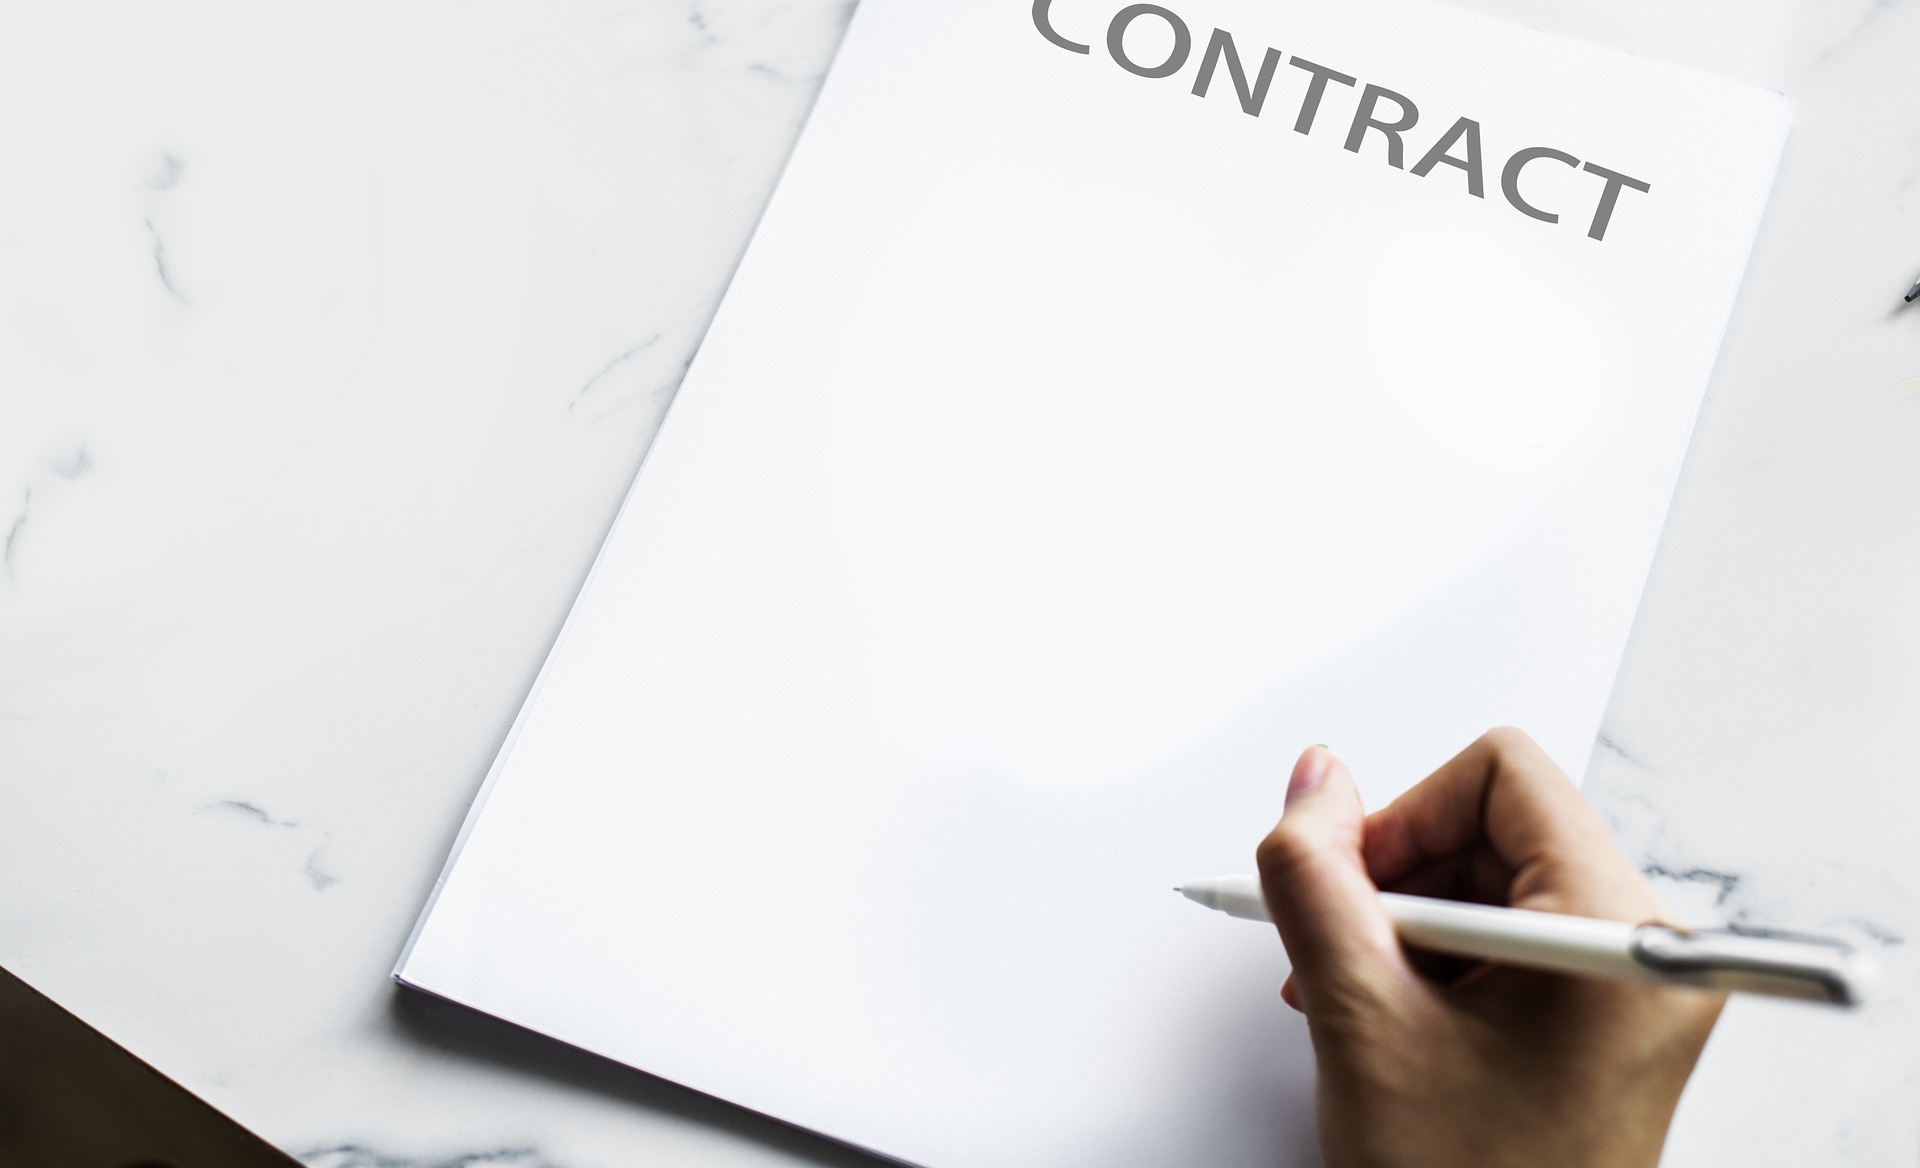 Review Your IT Contracts